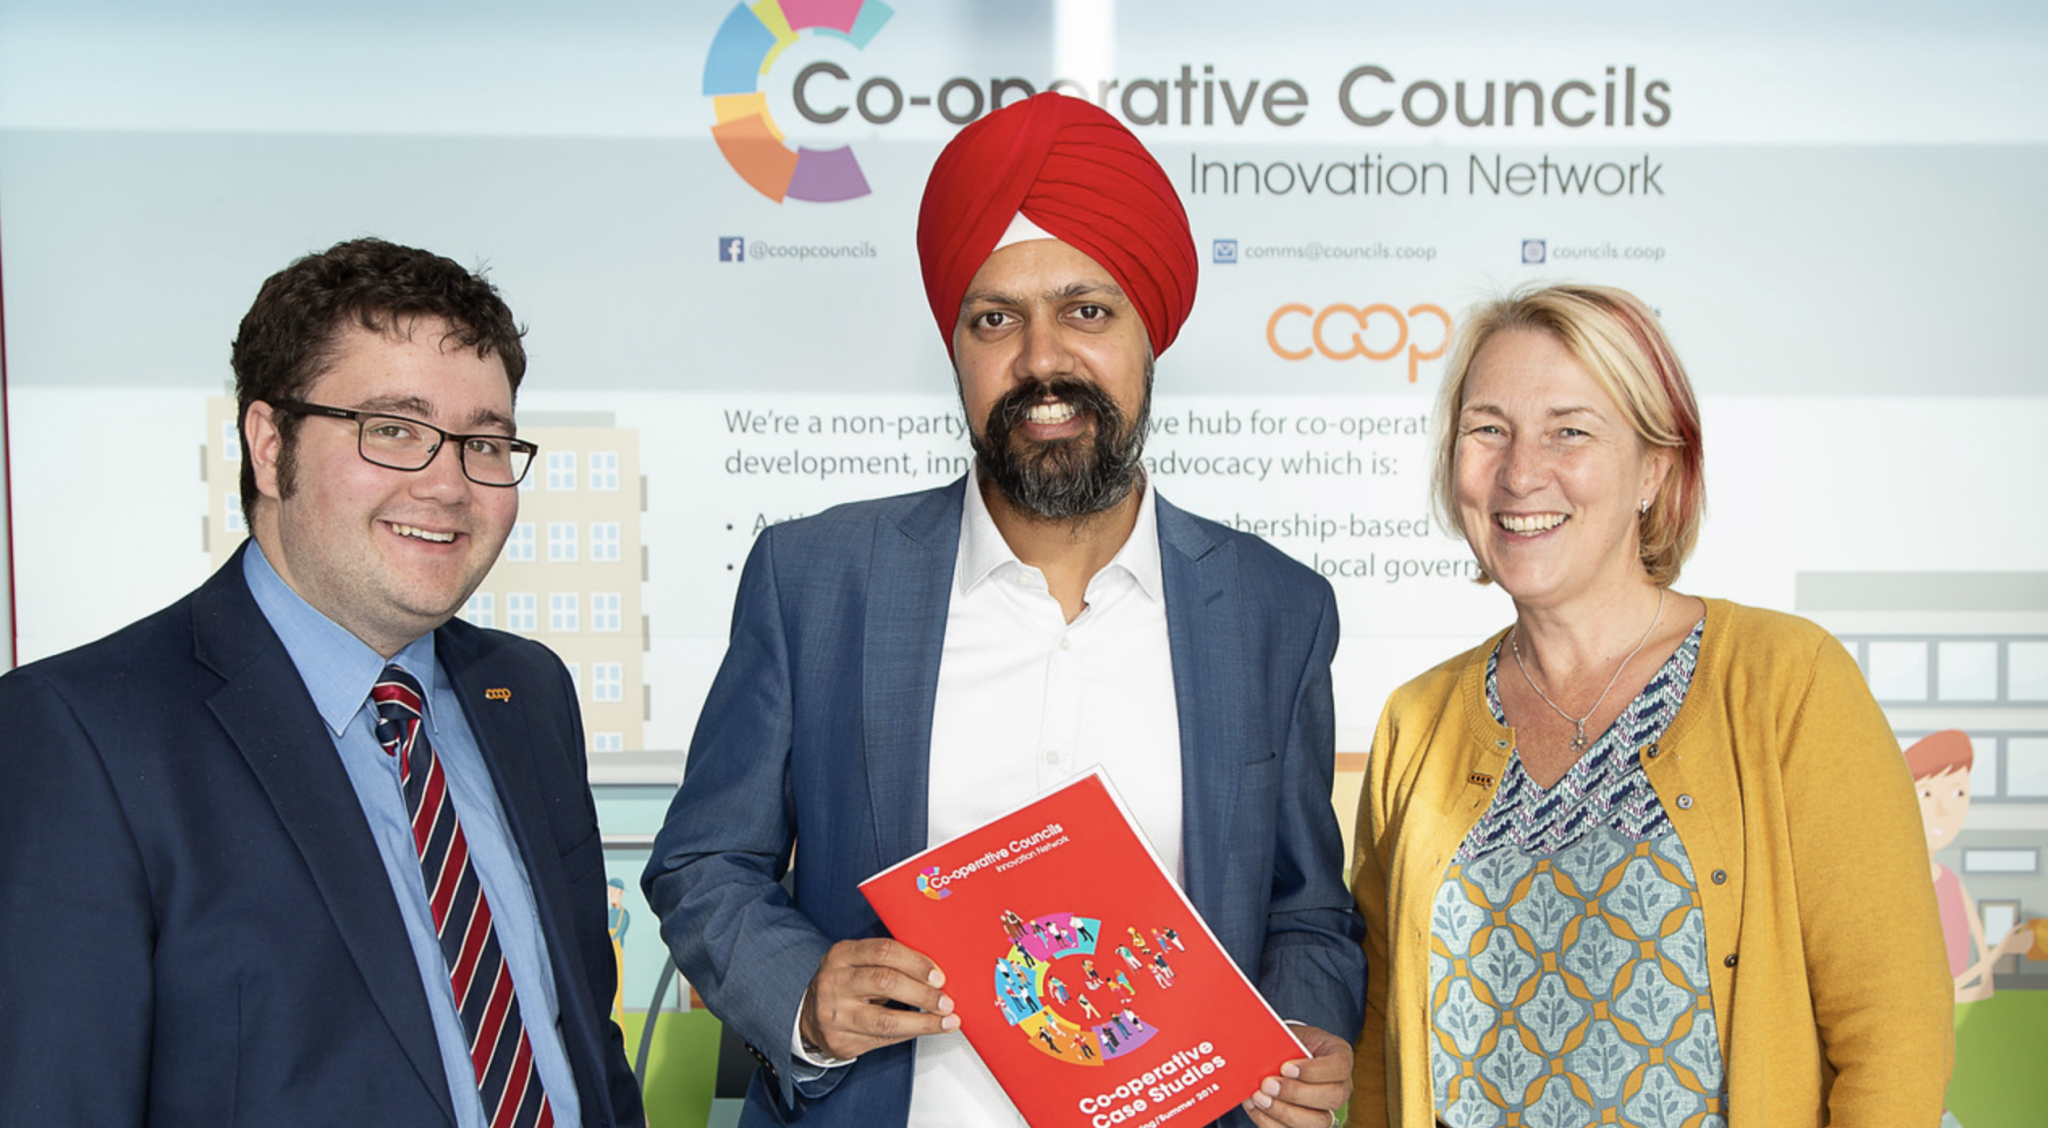 Nicola Huckerby of CCIN with Cllr Liam O’Rourke from Rochdale Borough Council and Slough MP Tan Dhesi